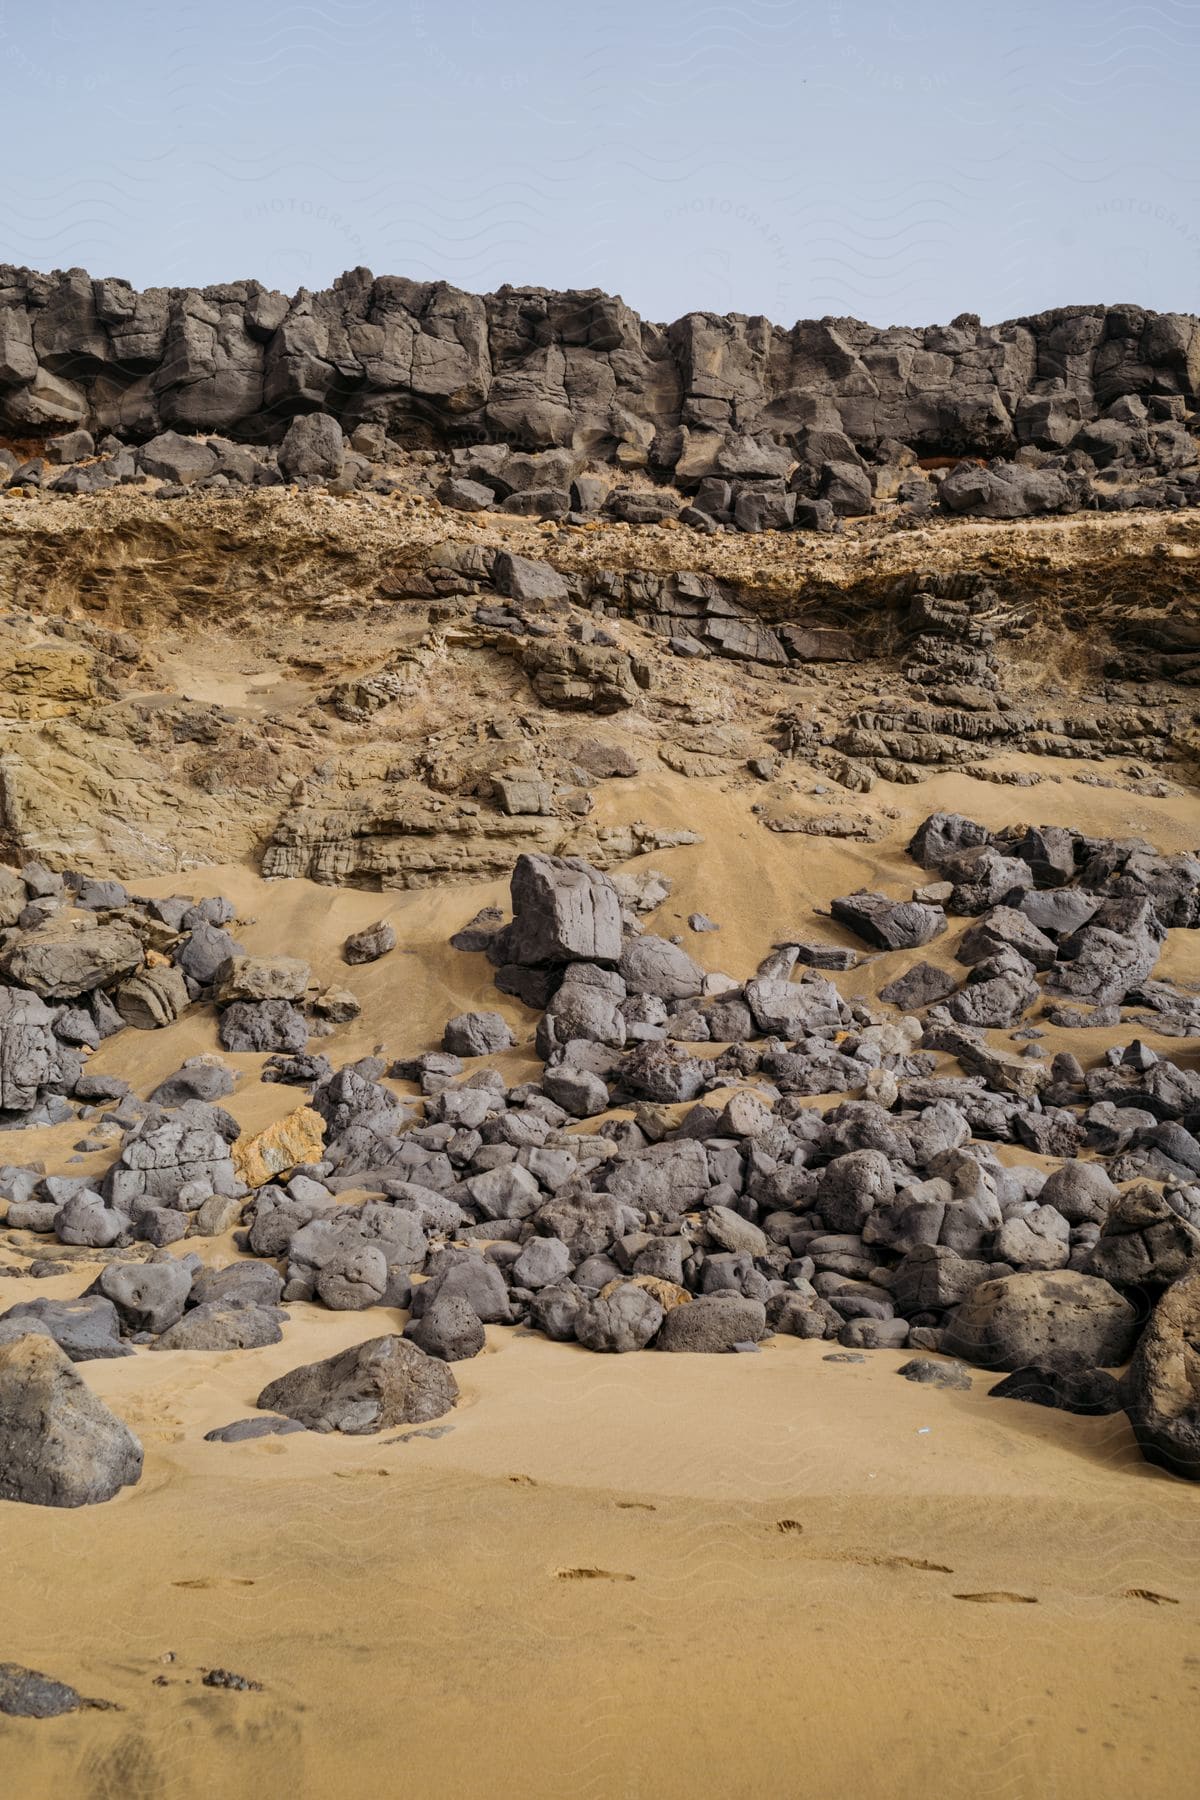 Rocks at the bottom of a rocky cliff above the sand